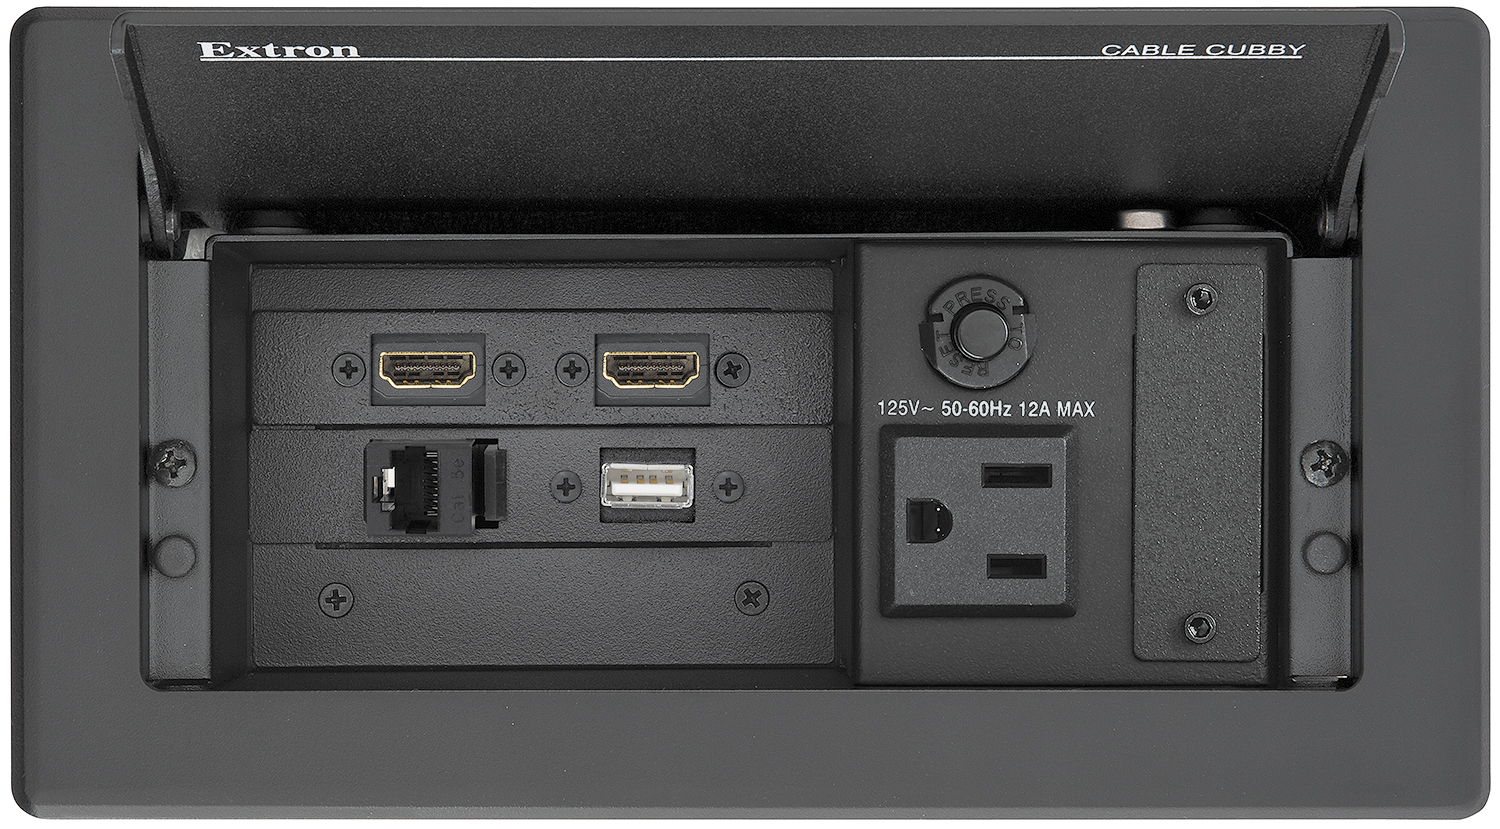 Cable Cubby 222 US shown with optional AV connectivity modules